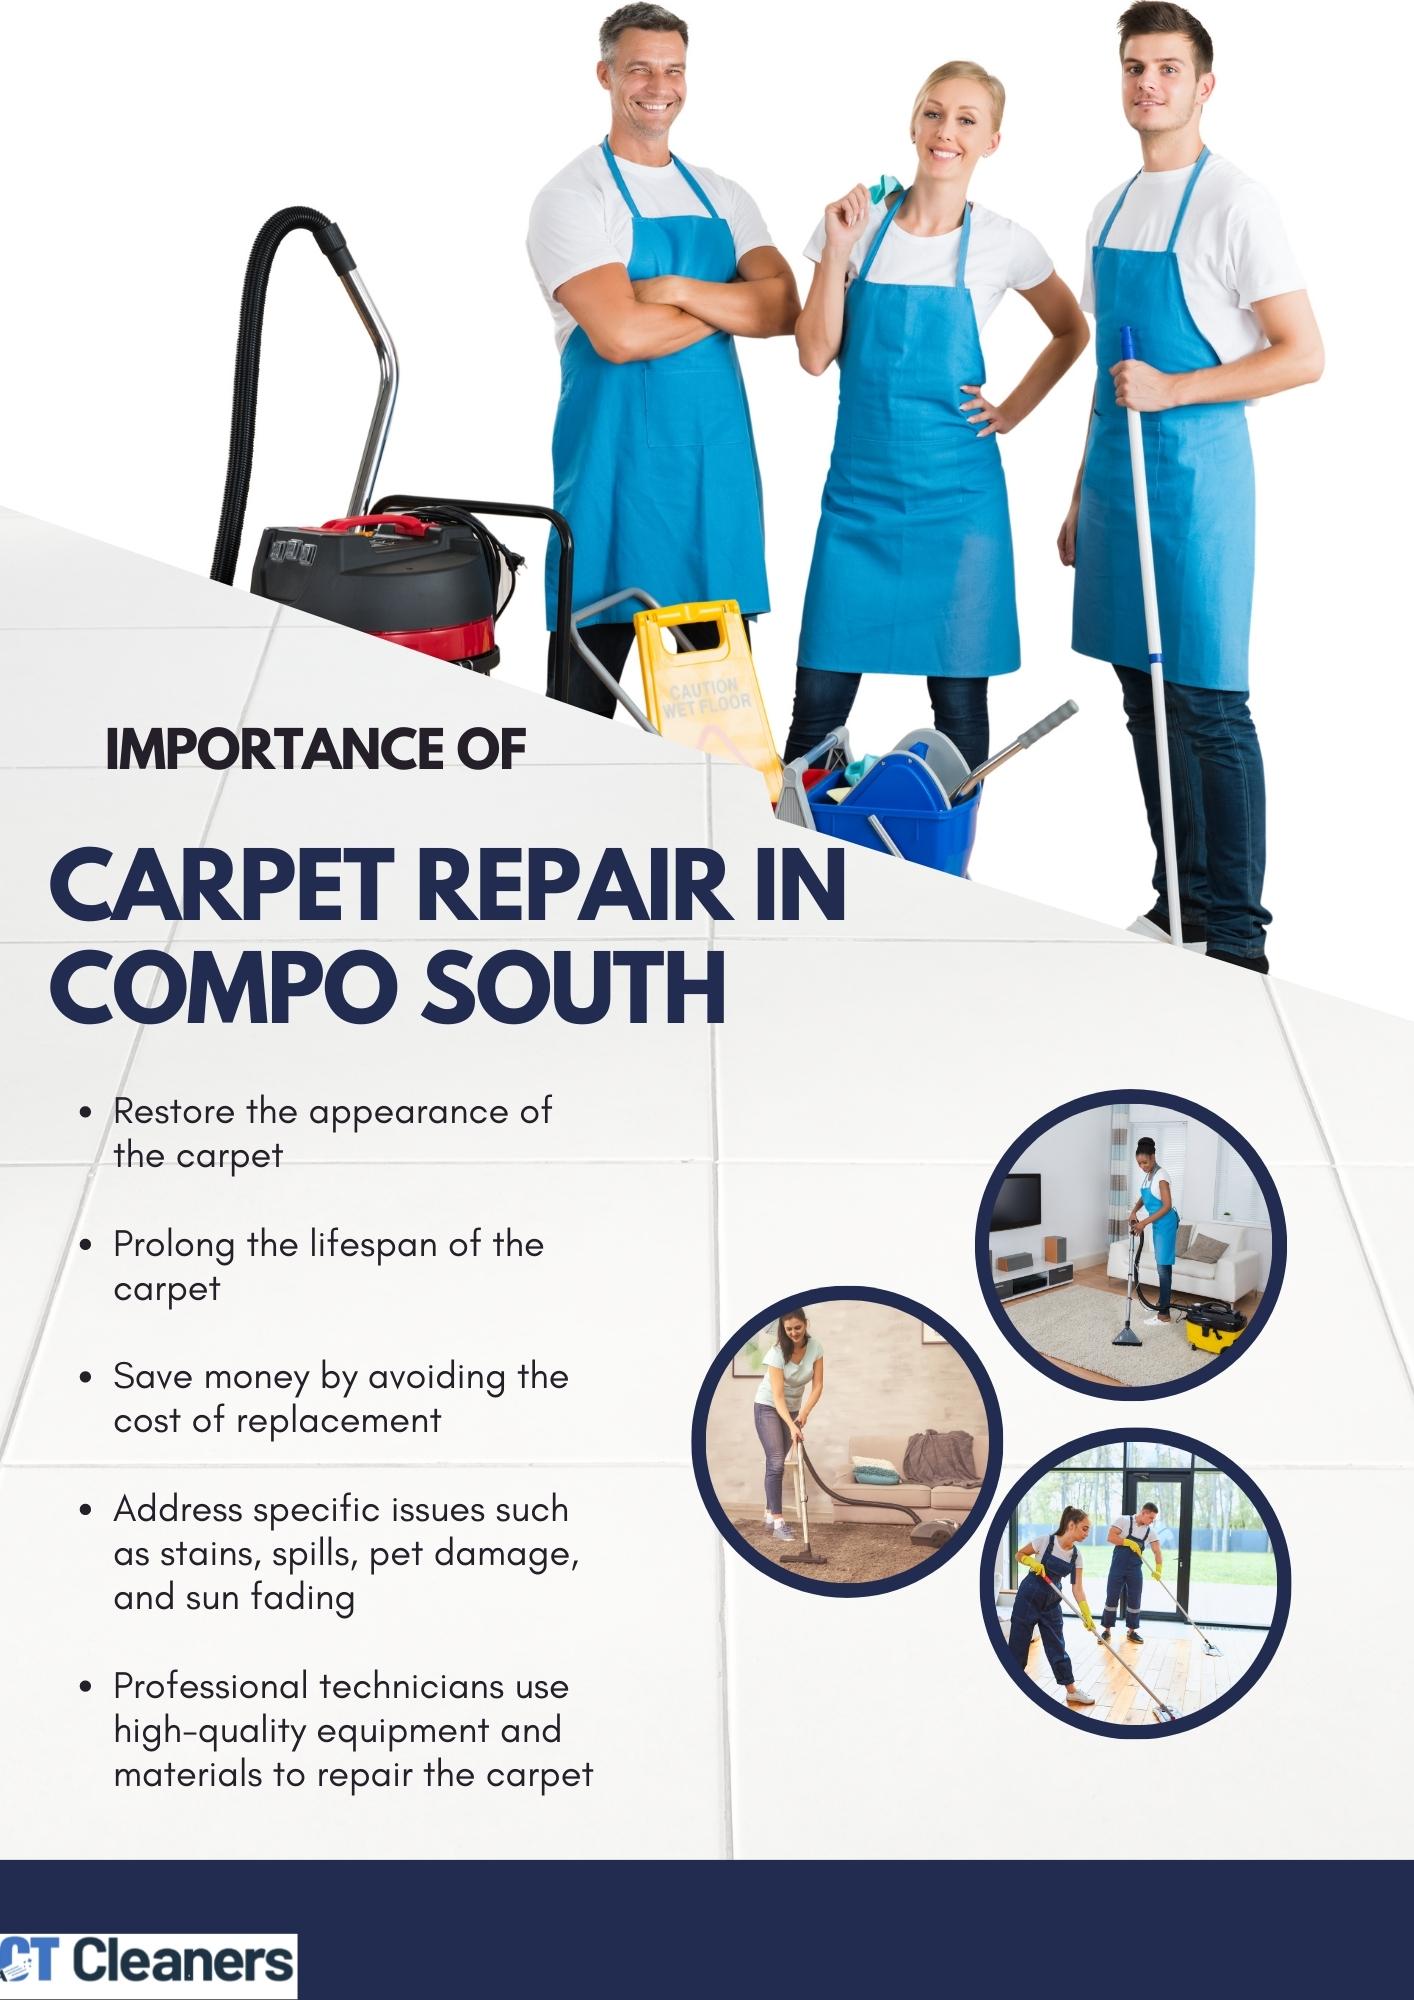 Importance of Carpet Repair in Compo South